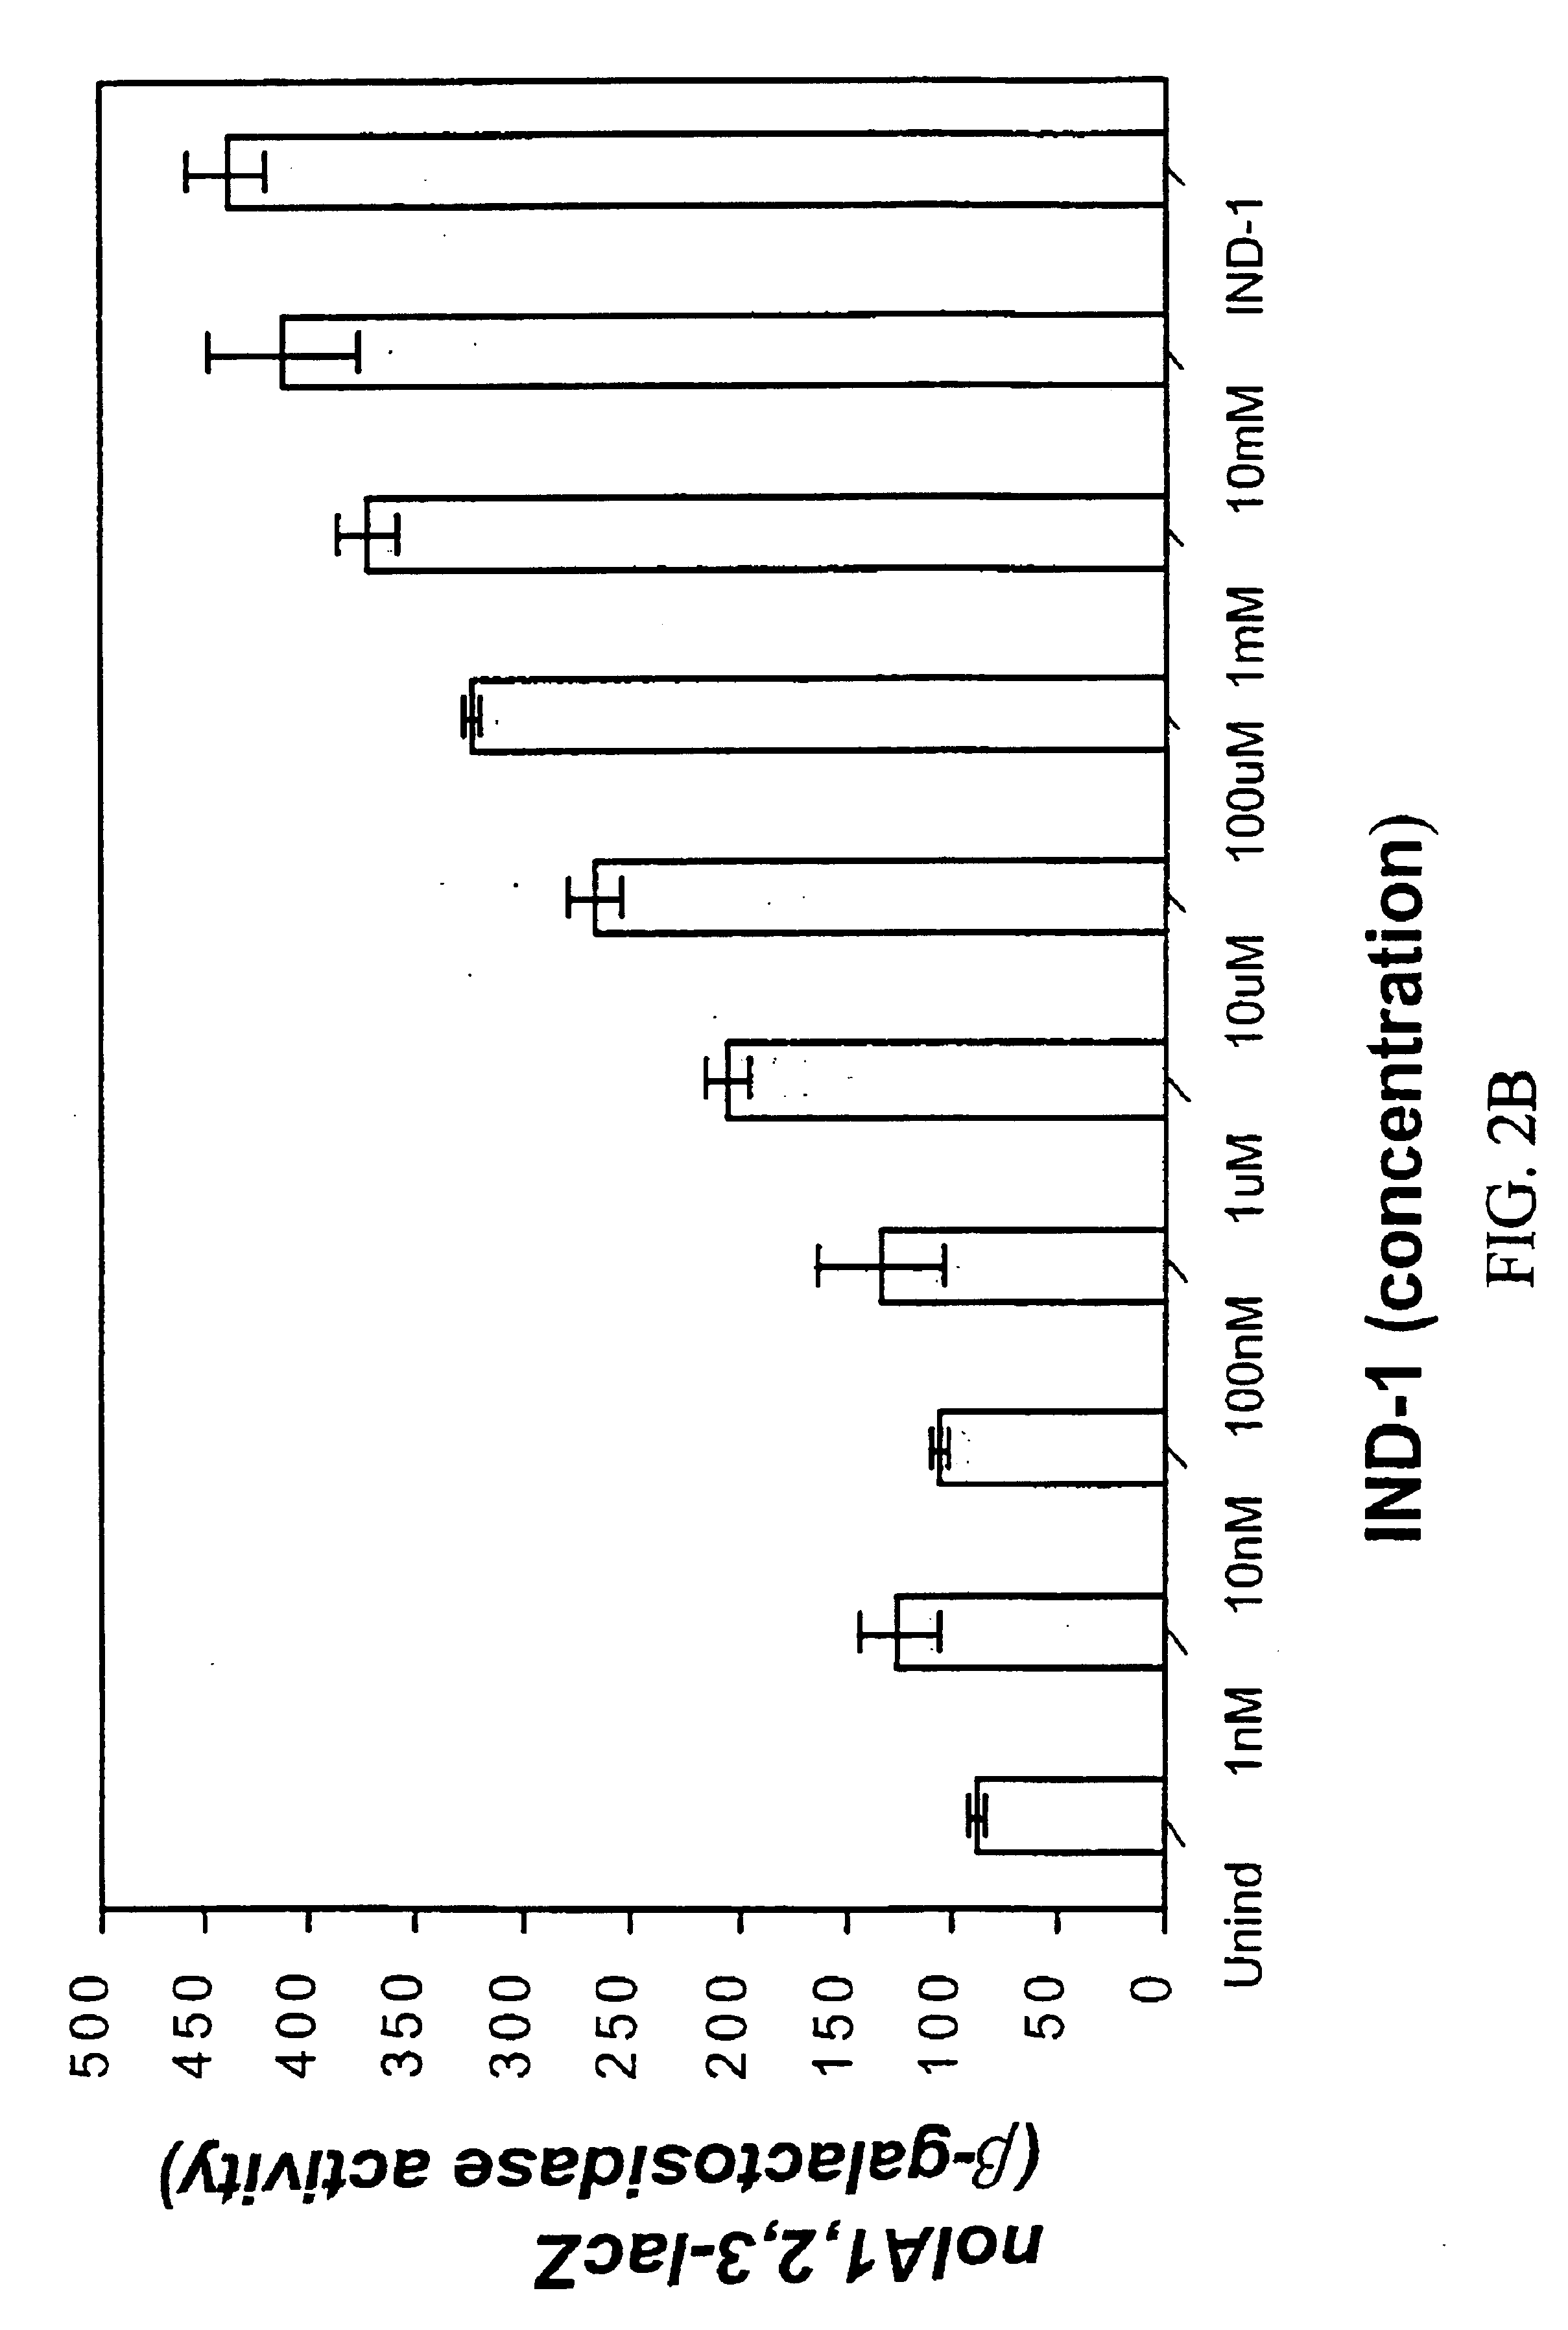 Materials and methods for the enhancement of effective root nodulation in legumes